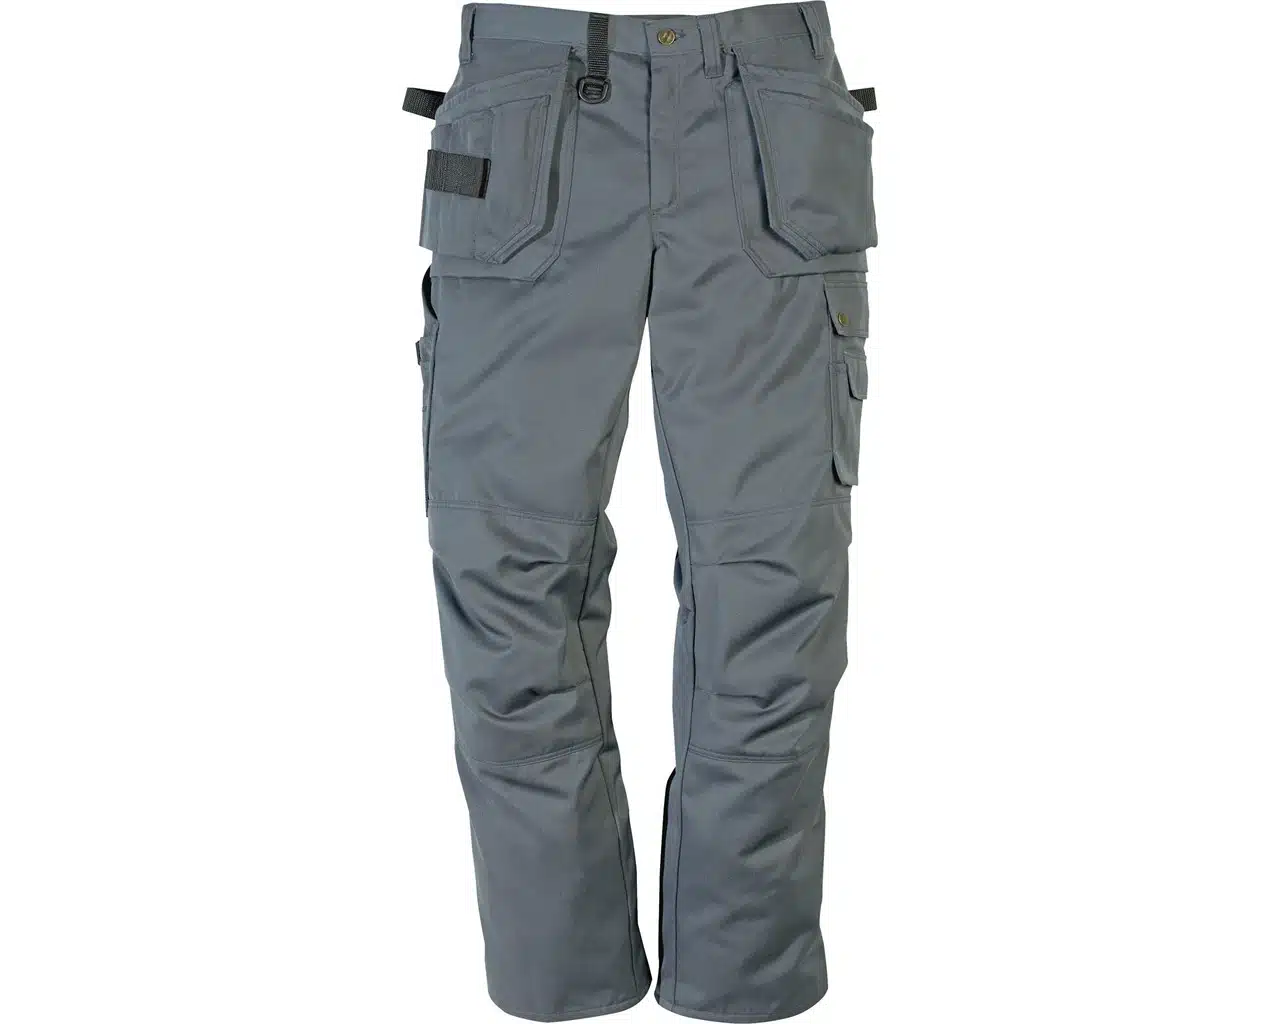 Fristads 100544 Craftsman Trousers 241 PS25-GREY-C46